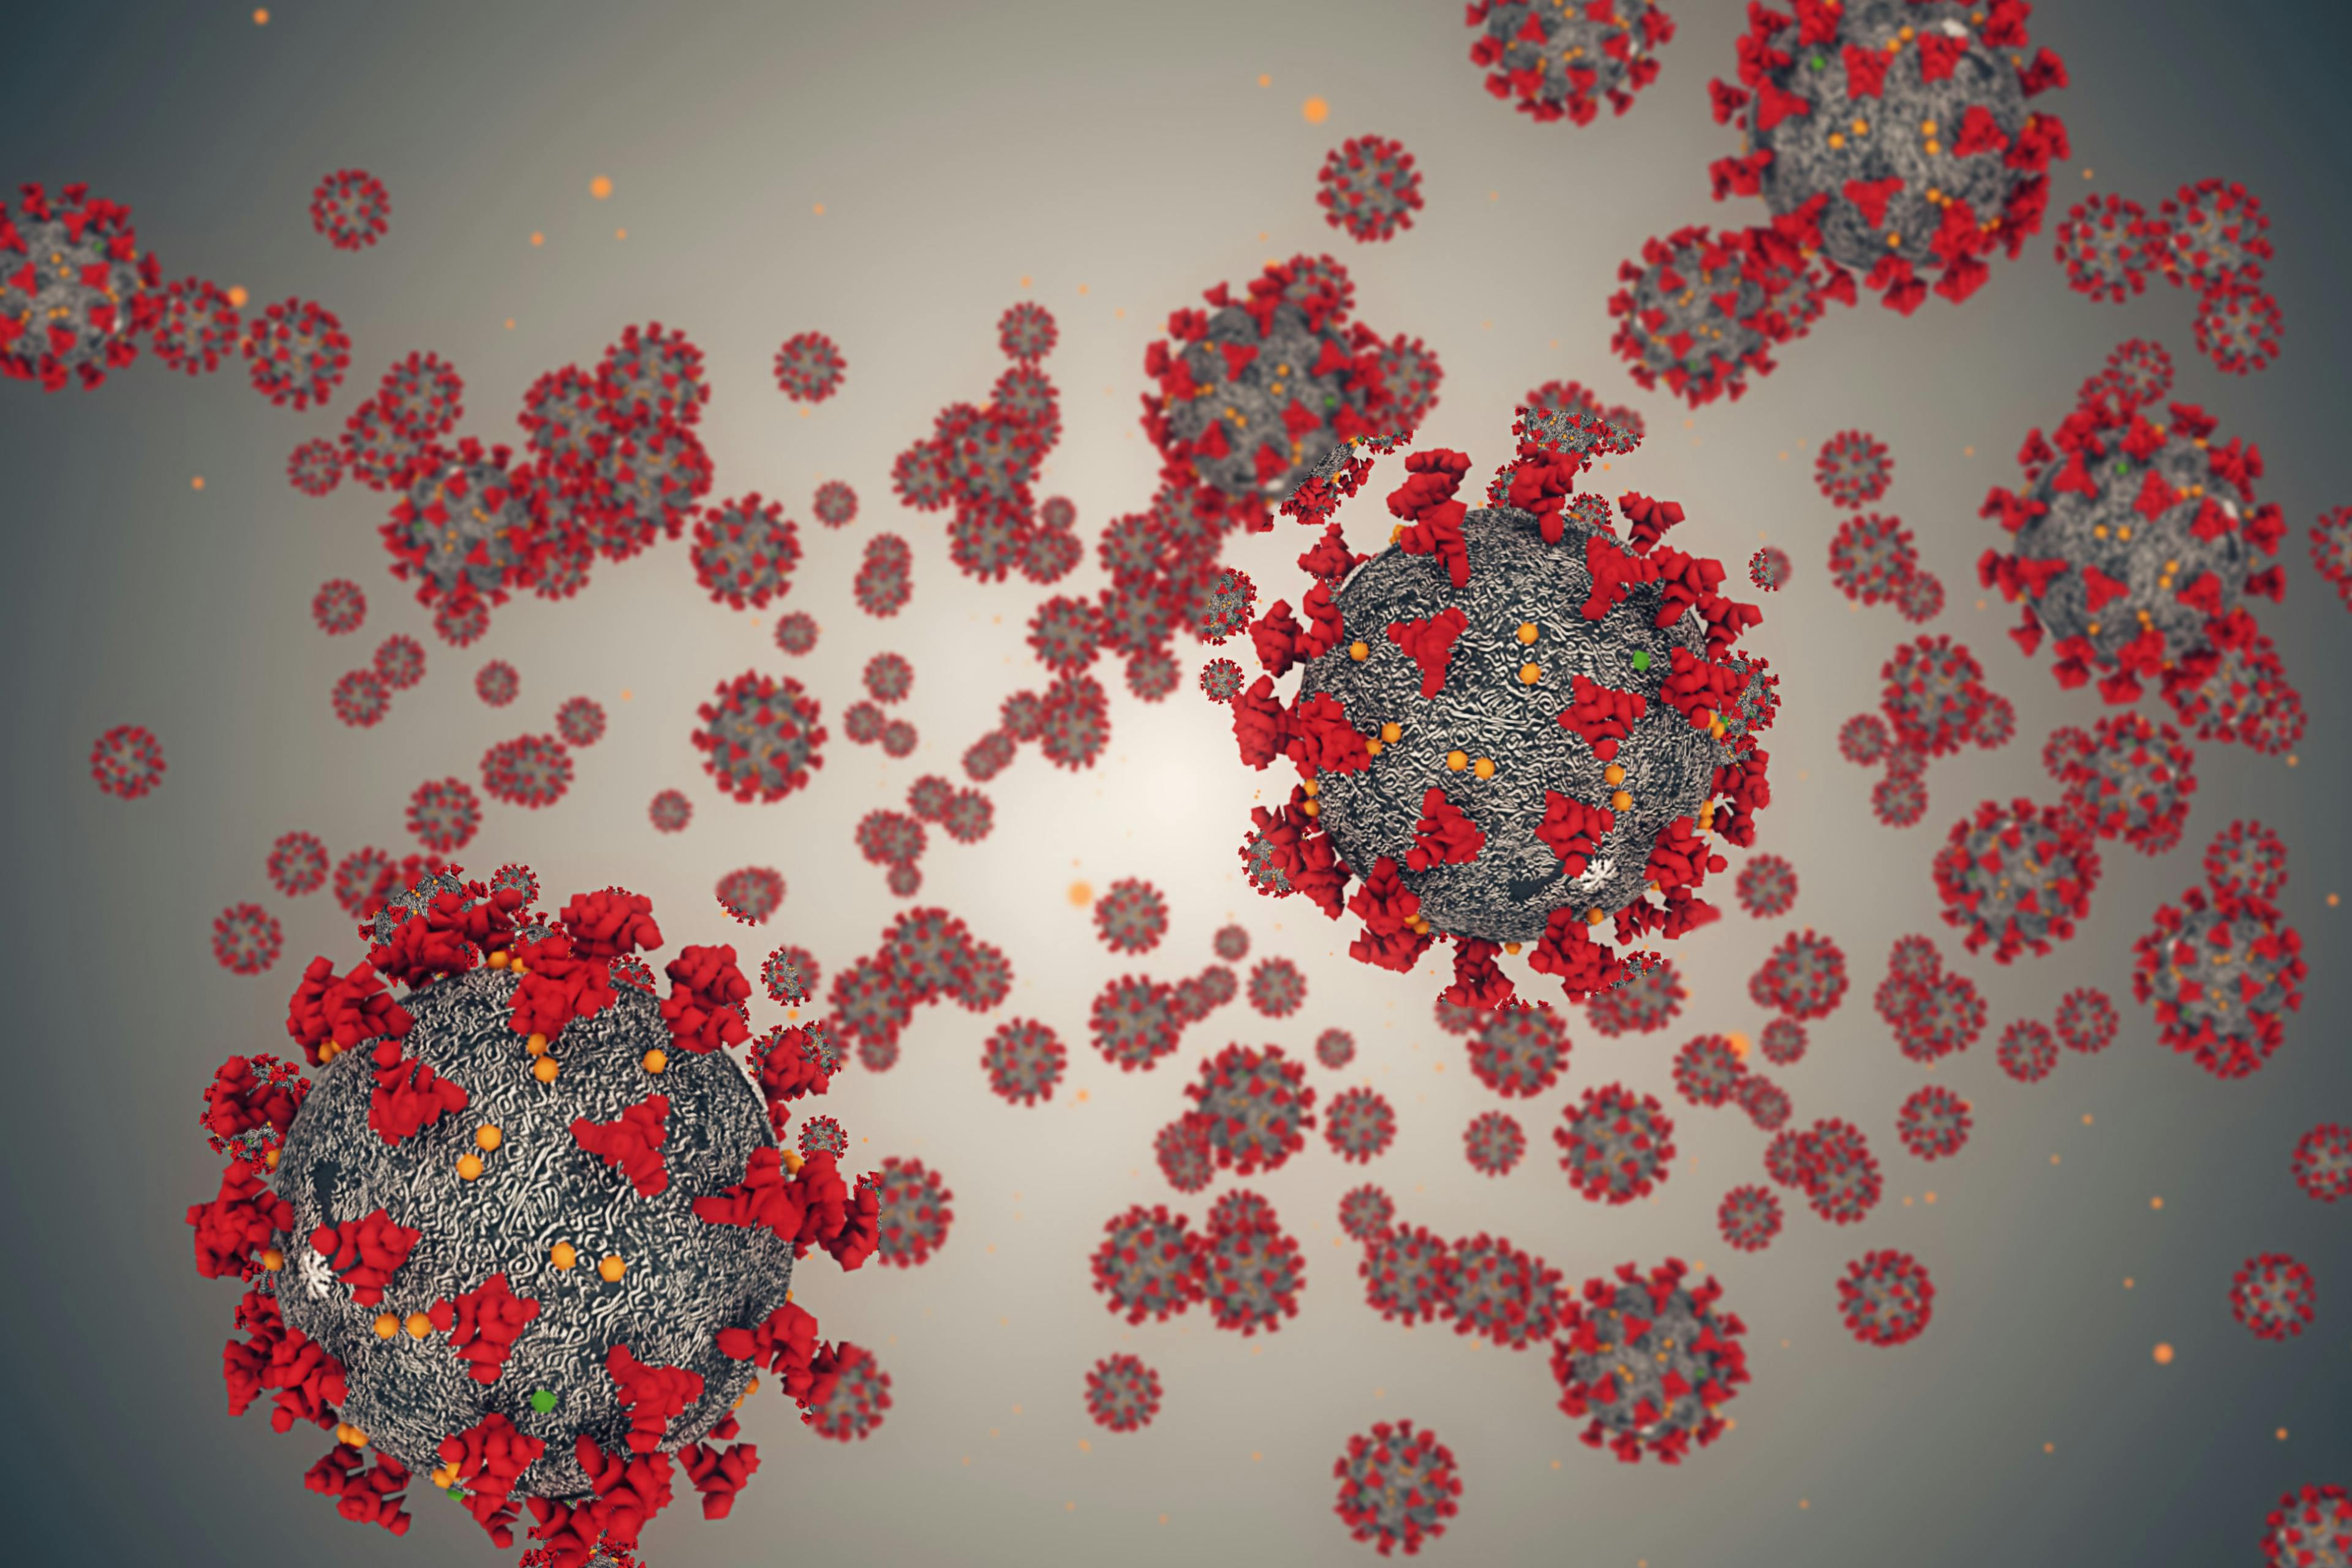 3D rendering, coronavirus cells covid-19 influenza flowing on grey gradient background as dangerous flu strain cases as a pandemic medical health risk concept of disease cells risk | Image Credit: donfiore - stock.adobe.com